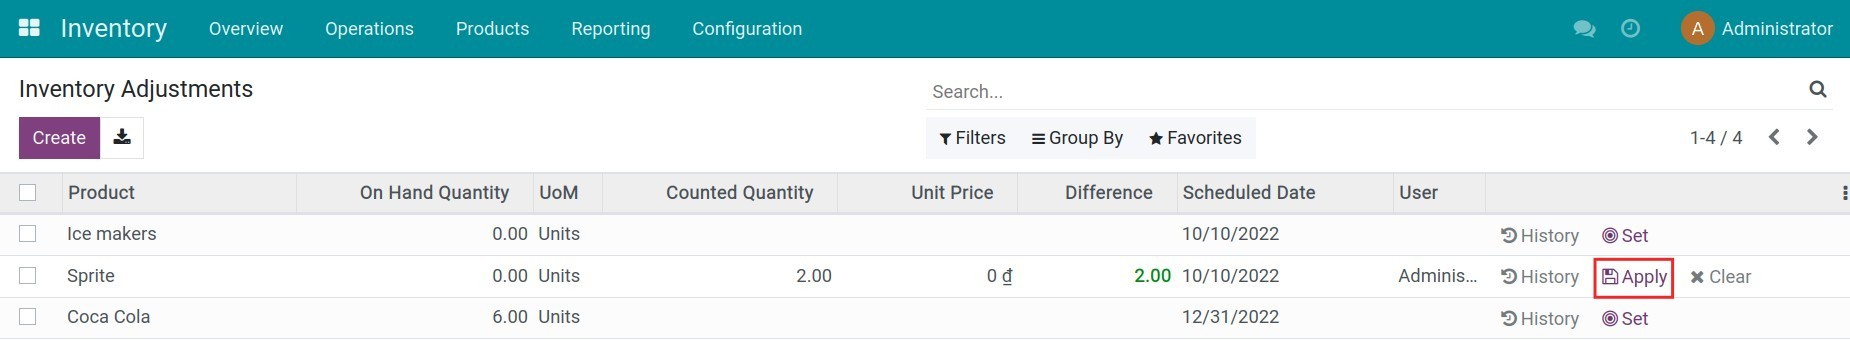 Create an inventory adjustment in Viindoo